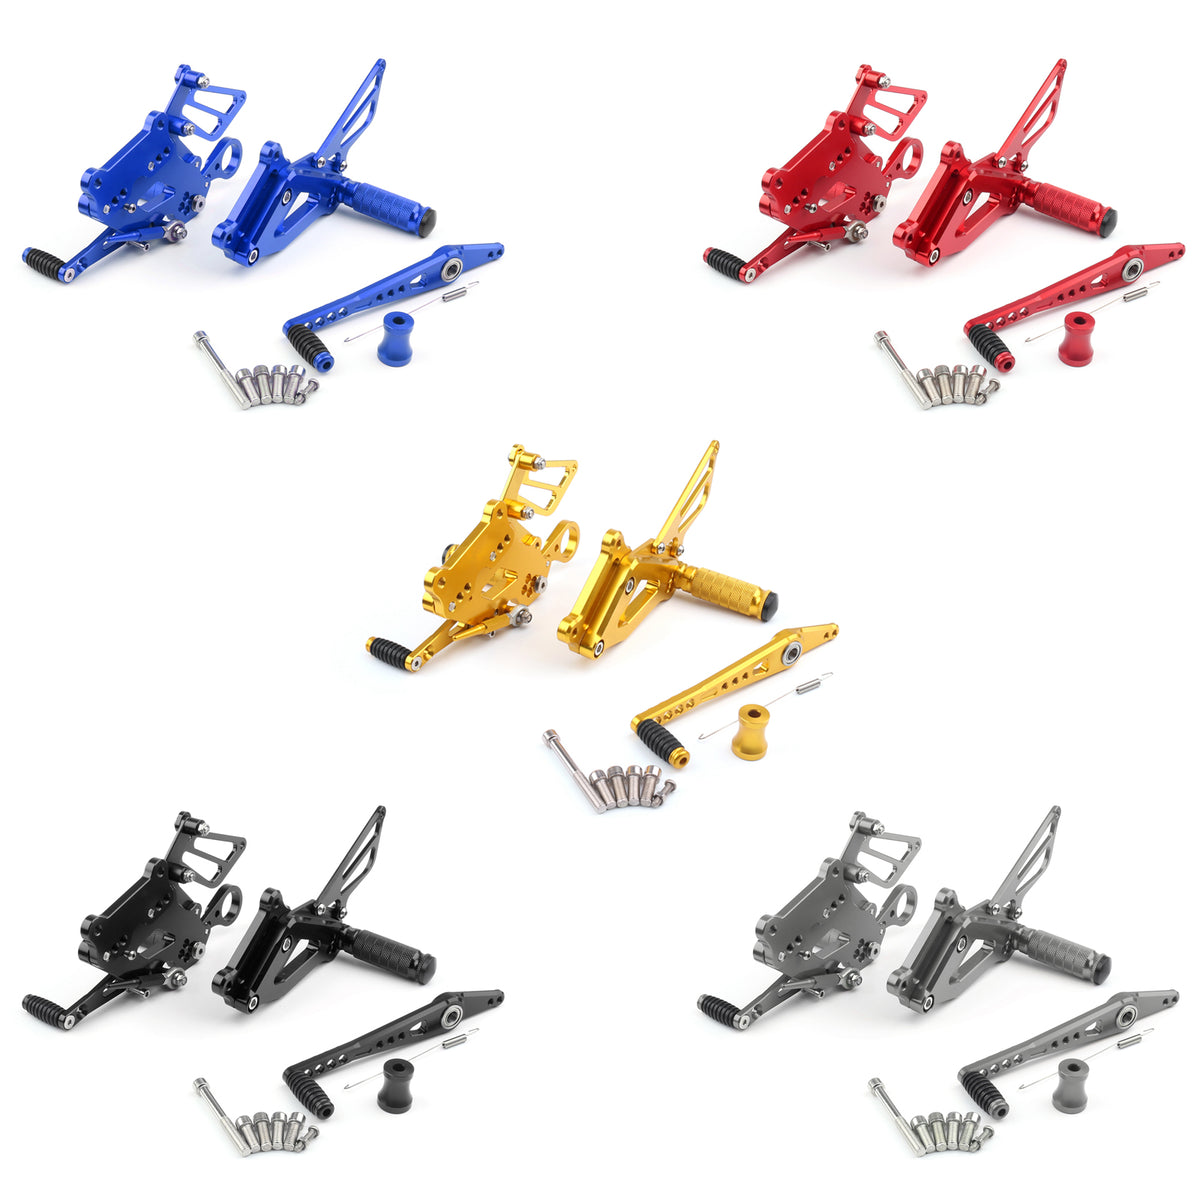 15-17 BMW S1000RR Motorcycle CNC Footrests Rear Sets Foot Pegs